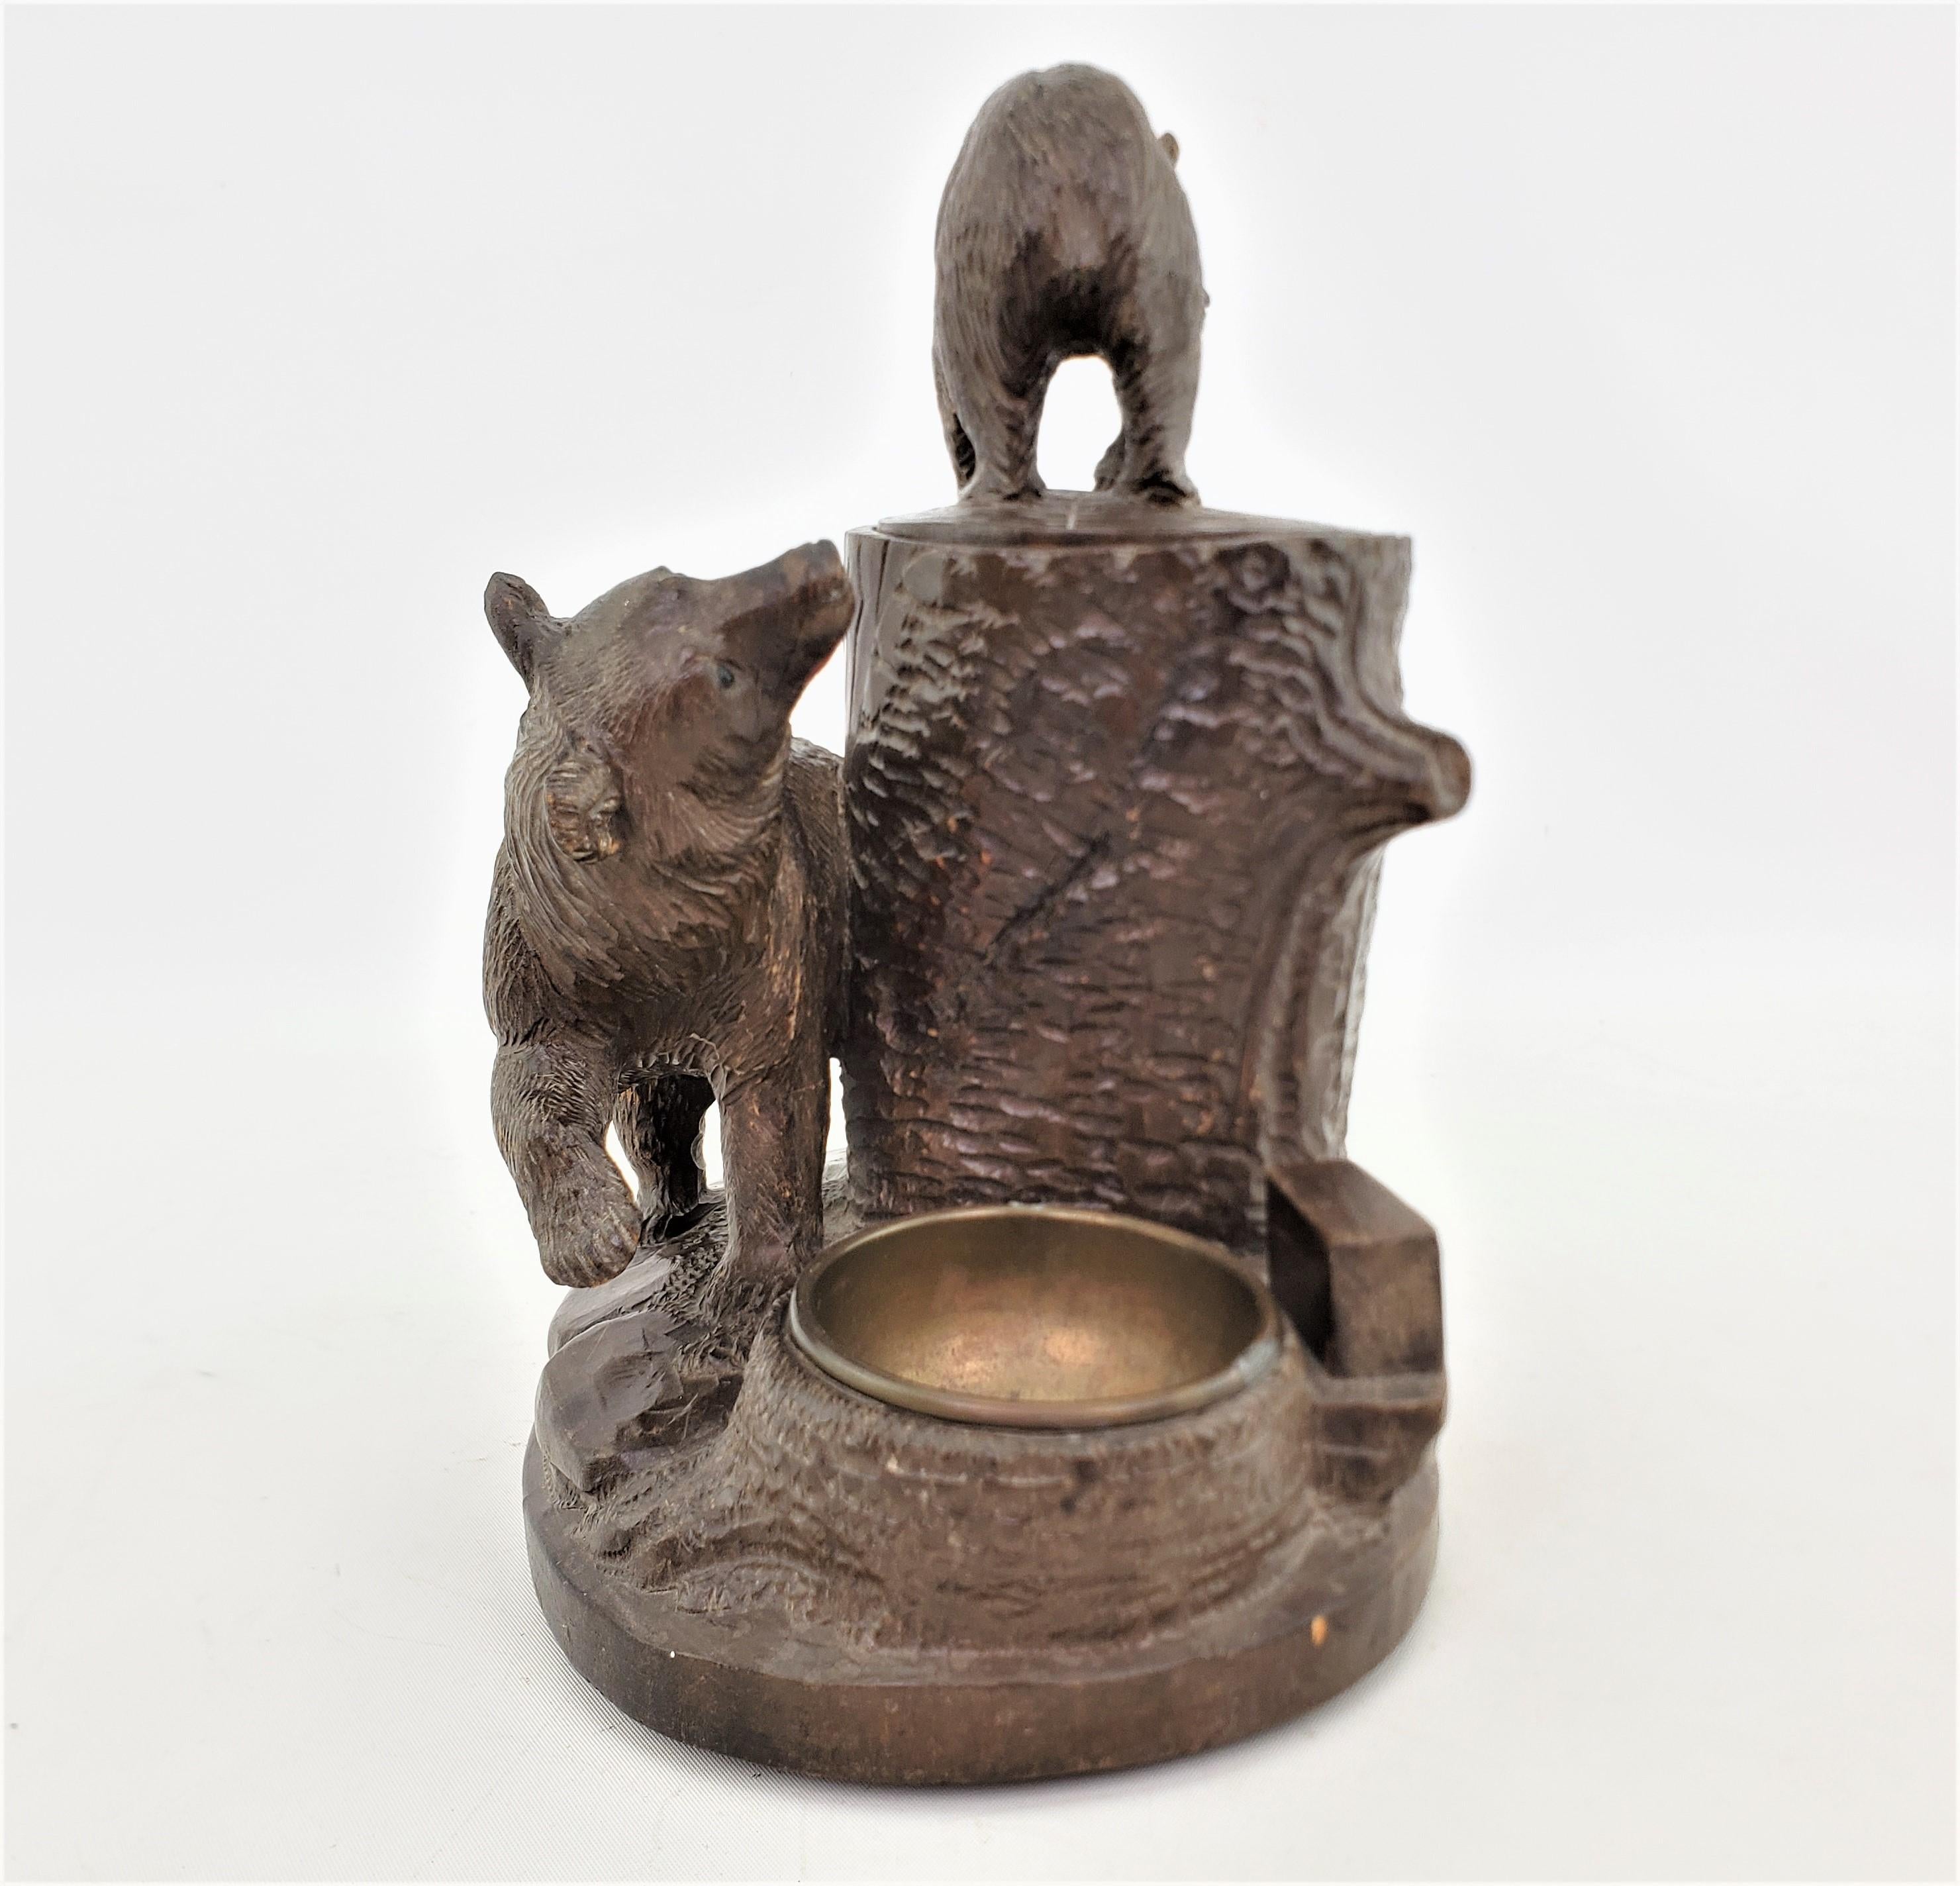 Austrian Antique Hand-Carved Black Forest Tobacco Jar or Humidor & Ashtray with Bears For Sale